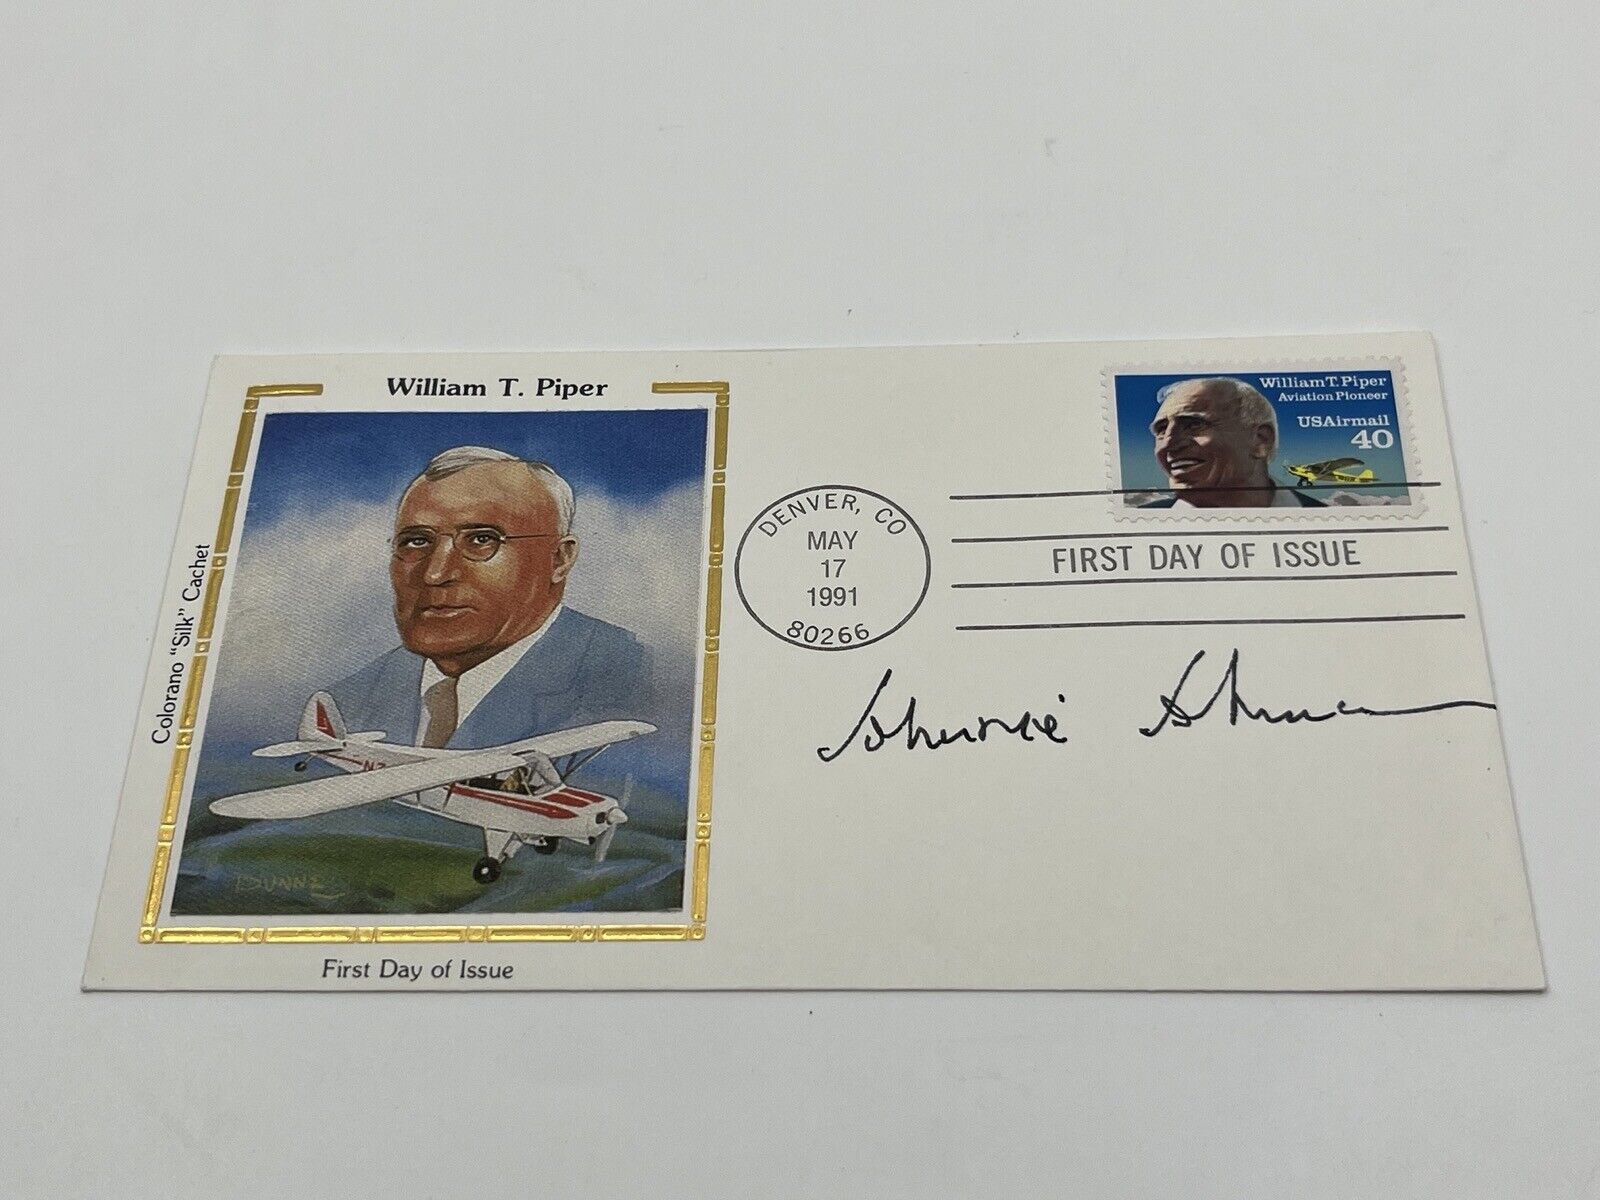 Johnnie Johnson WWII British Ace Signed Autograph First Day Cover PSA DNA *34